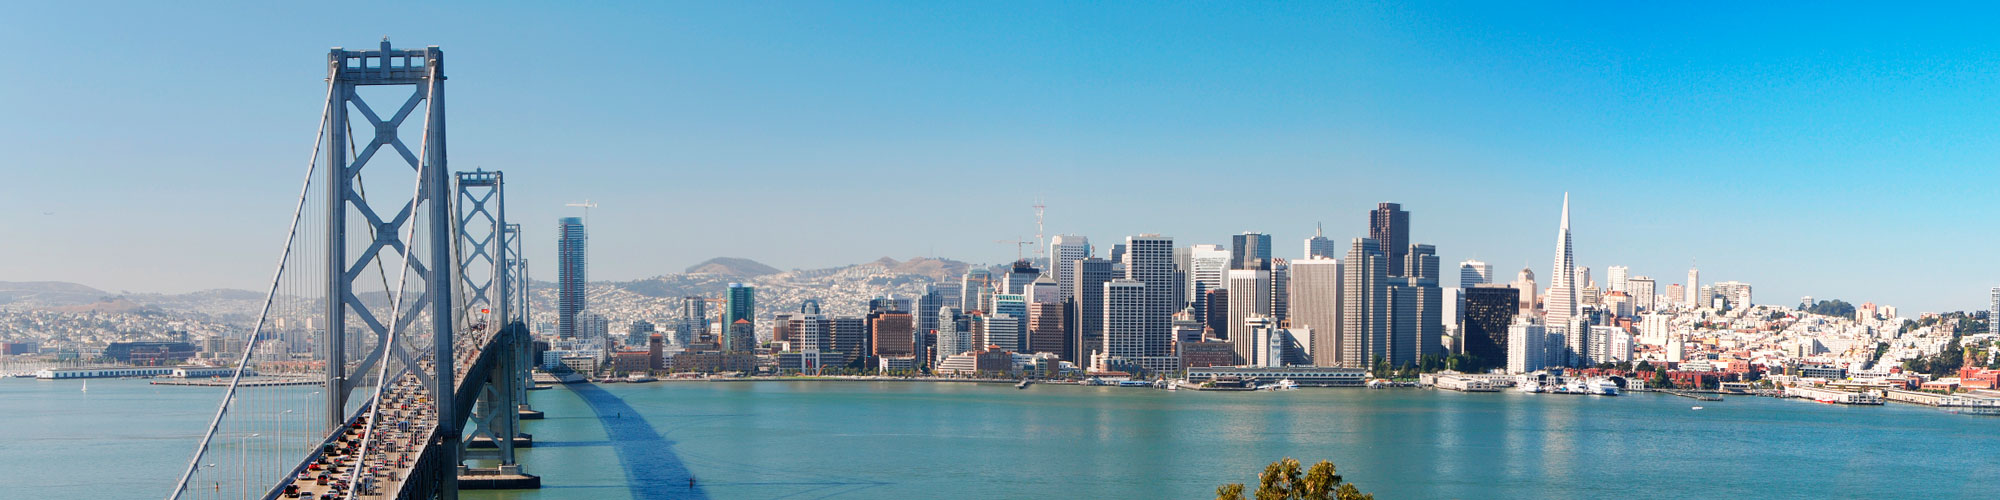 Attorneys in the San Francisco Bay Area and the East Bay